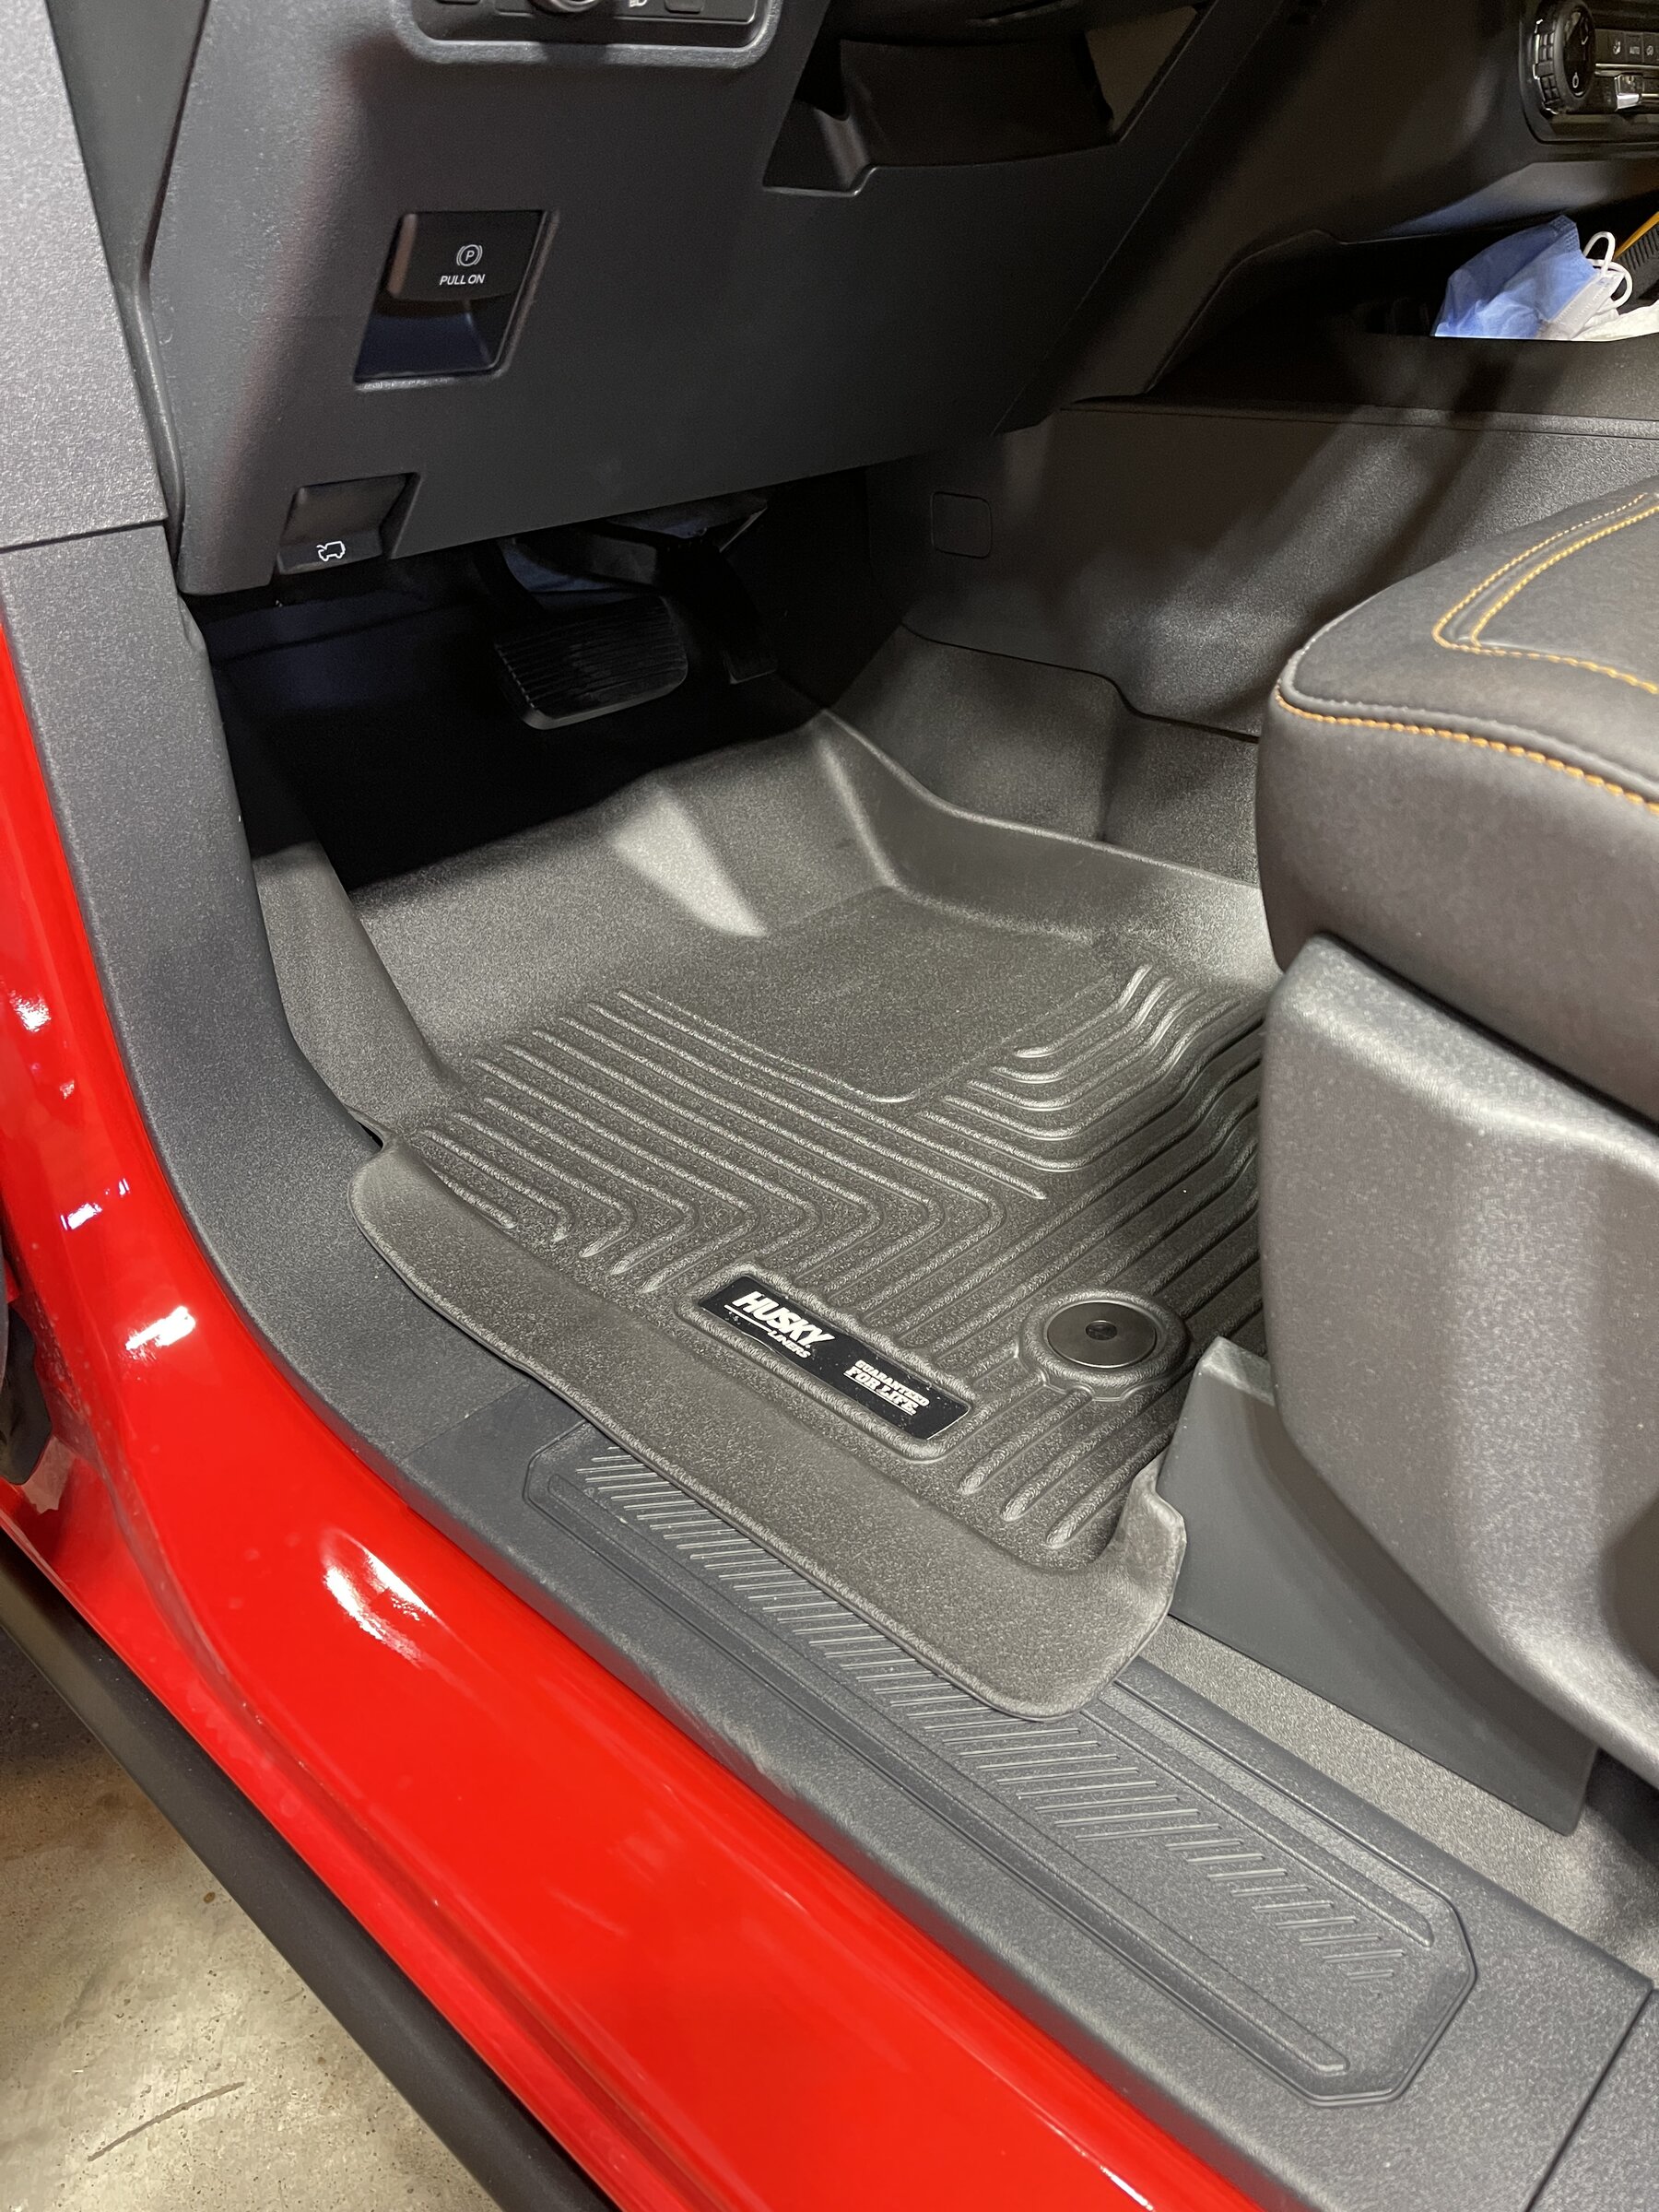 Ford Bronco Review: Husky X-act Contour Mats (2nd row) with Washout/Rubberized Floor 911F9A60-5617-4C4A-AB8E-7AA271E73907